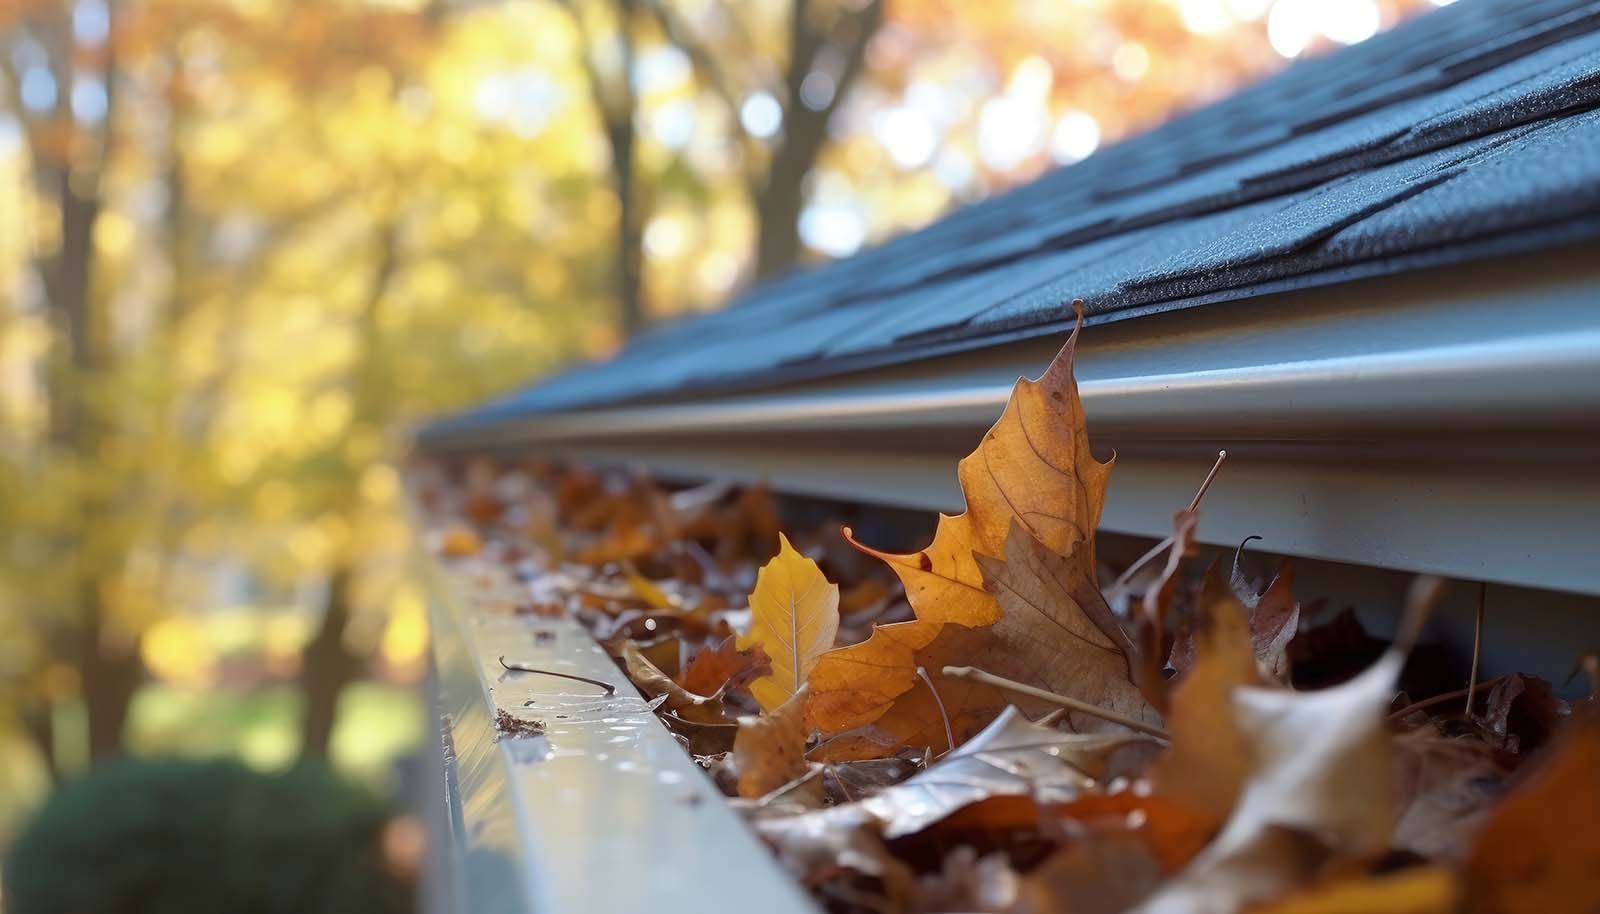 KOS Cleaning offers top rated gutter cleaning services and exterior cleaning services on Long Island